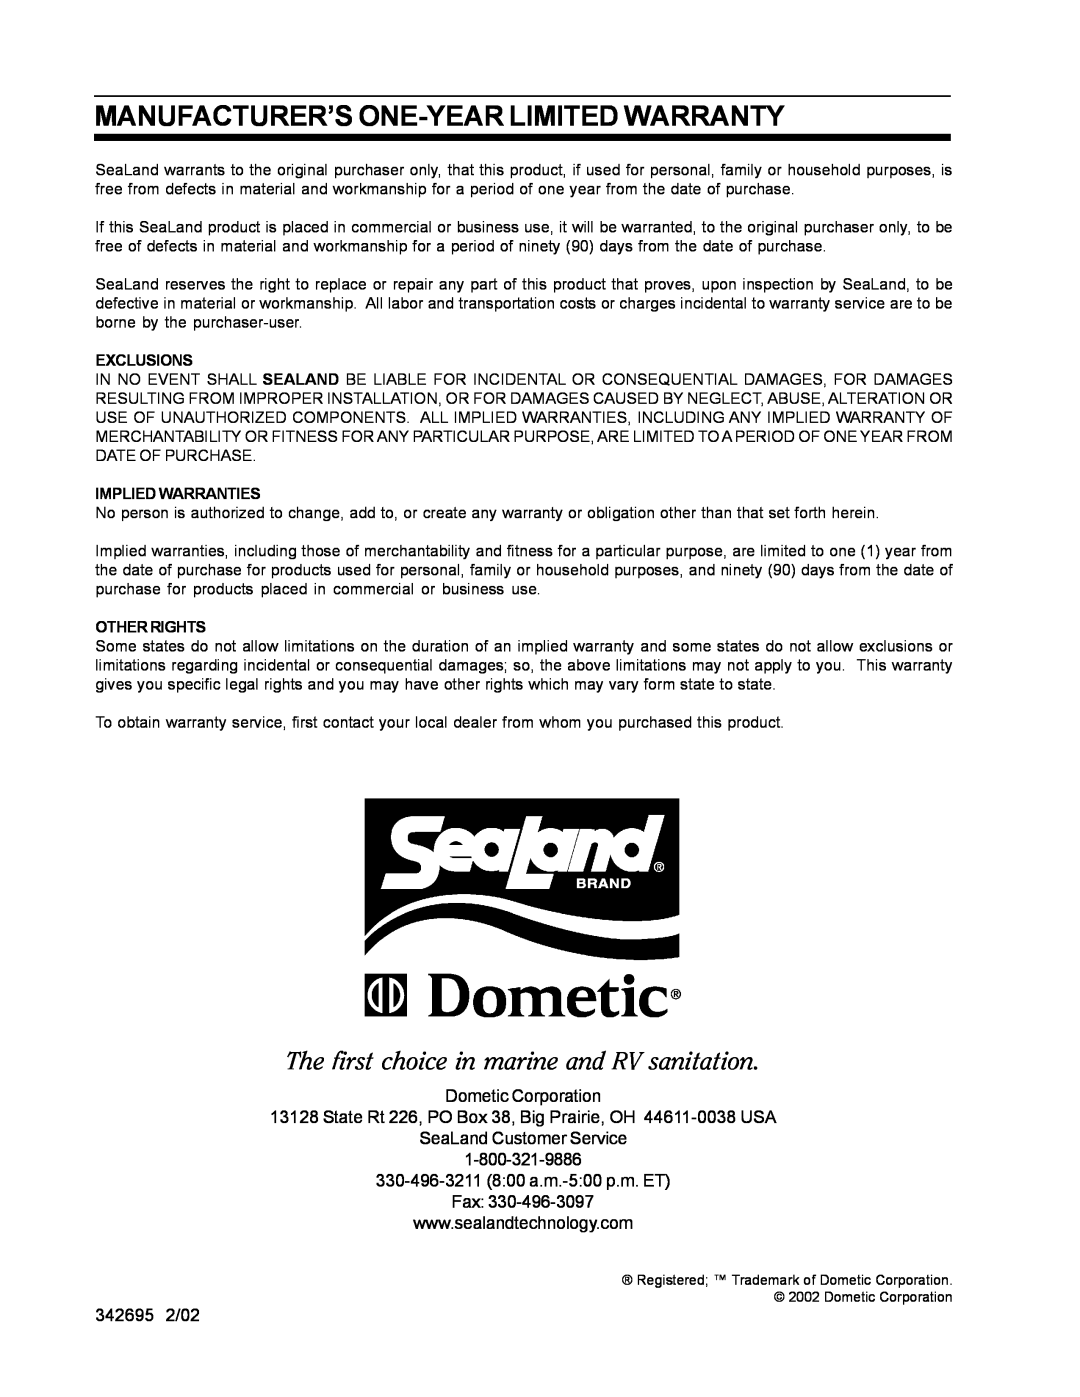 SeaLand Vacuum Pump Manufacturer’S One-Yearlimited Warranty, The first choice in marine and RV sanitation, Exclusions 